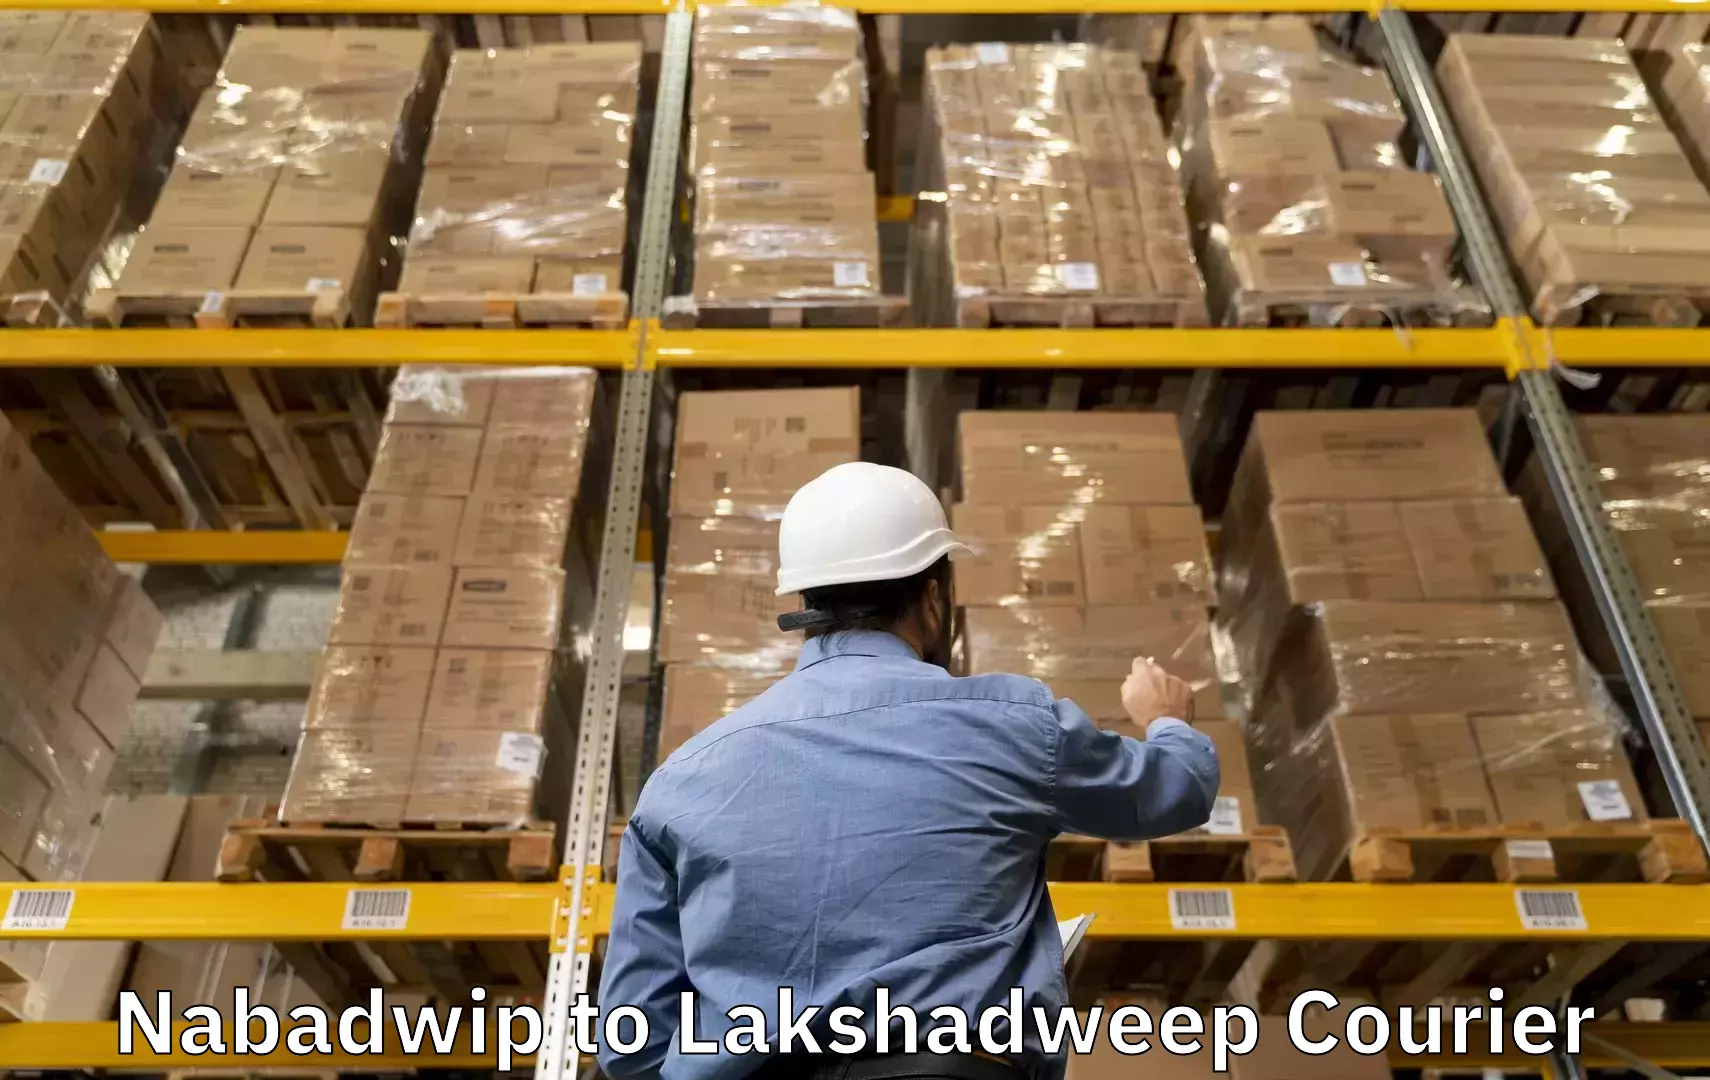 Luggage shipping specialists Nabadwip to Lakshadweep